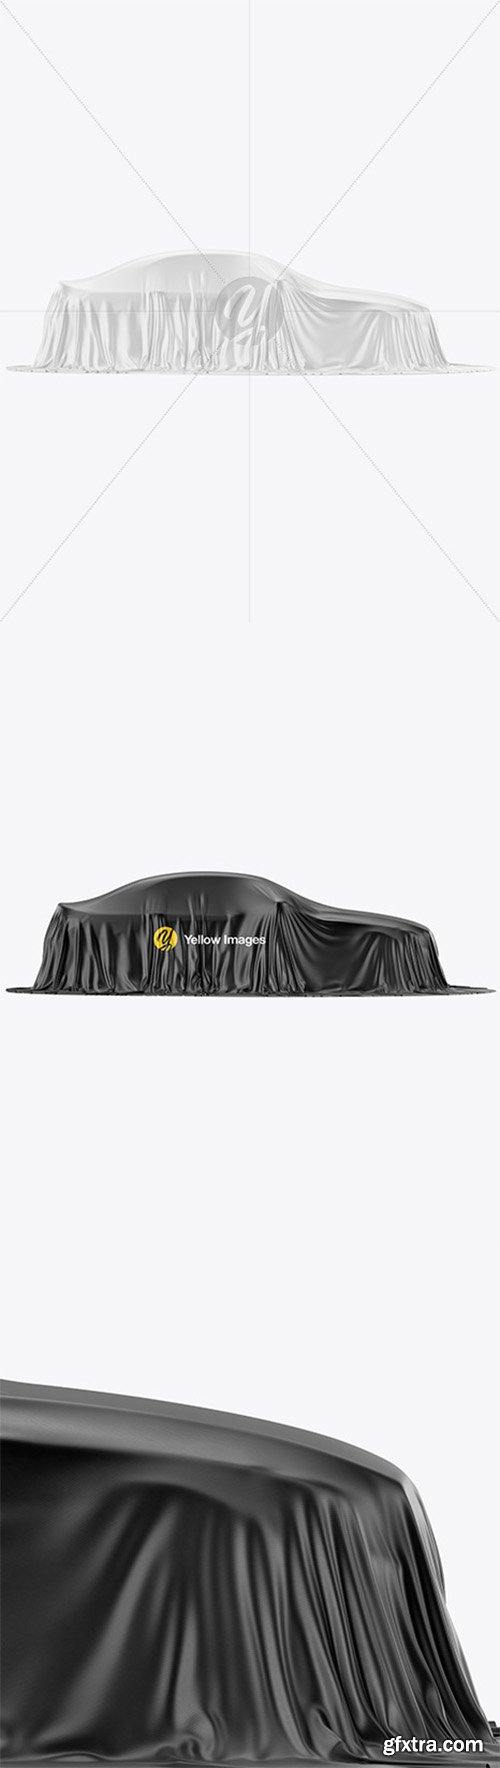 Download Car Cover Mockup Download Free And Premium Smartmockup Psd Templates And Design Assets Yellowimages Mockups